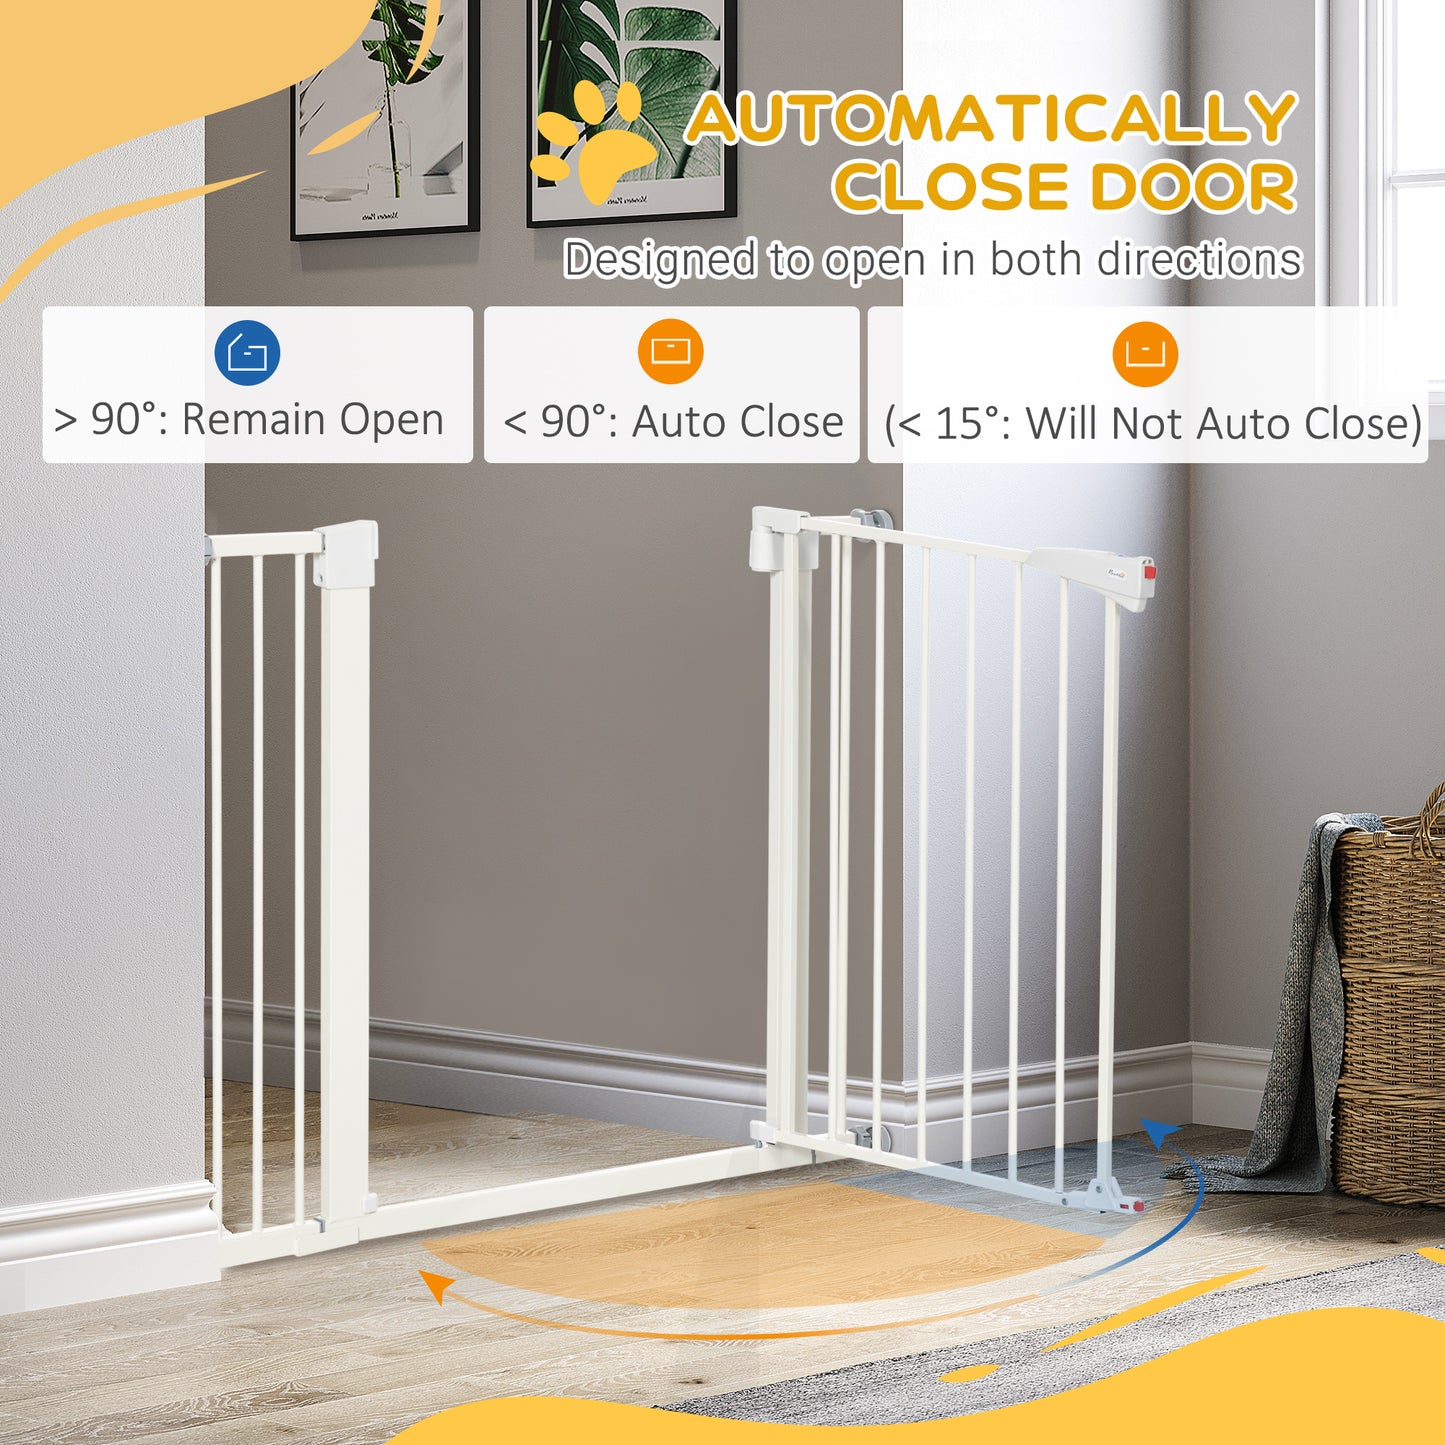 29.5" - 32" Dog Gate for Doorways Stairs with Luminous Handle, Pressure Mount Safety Gate for Easy Step with Auto Close, Walk Through Pet Gate for Small and Medium Dogs